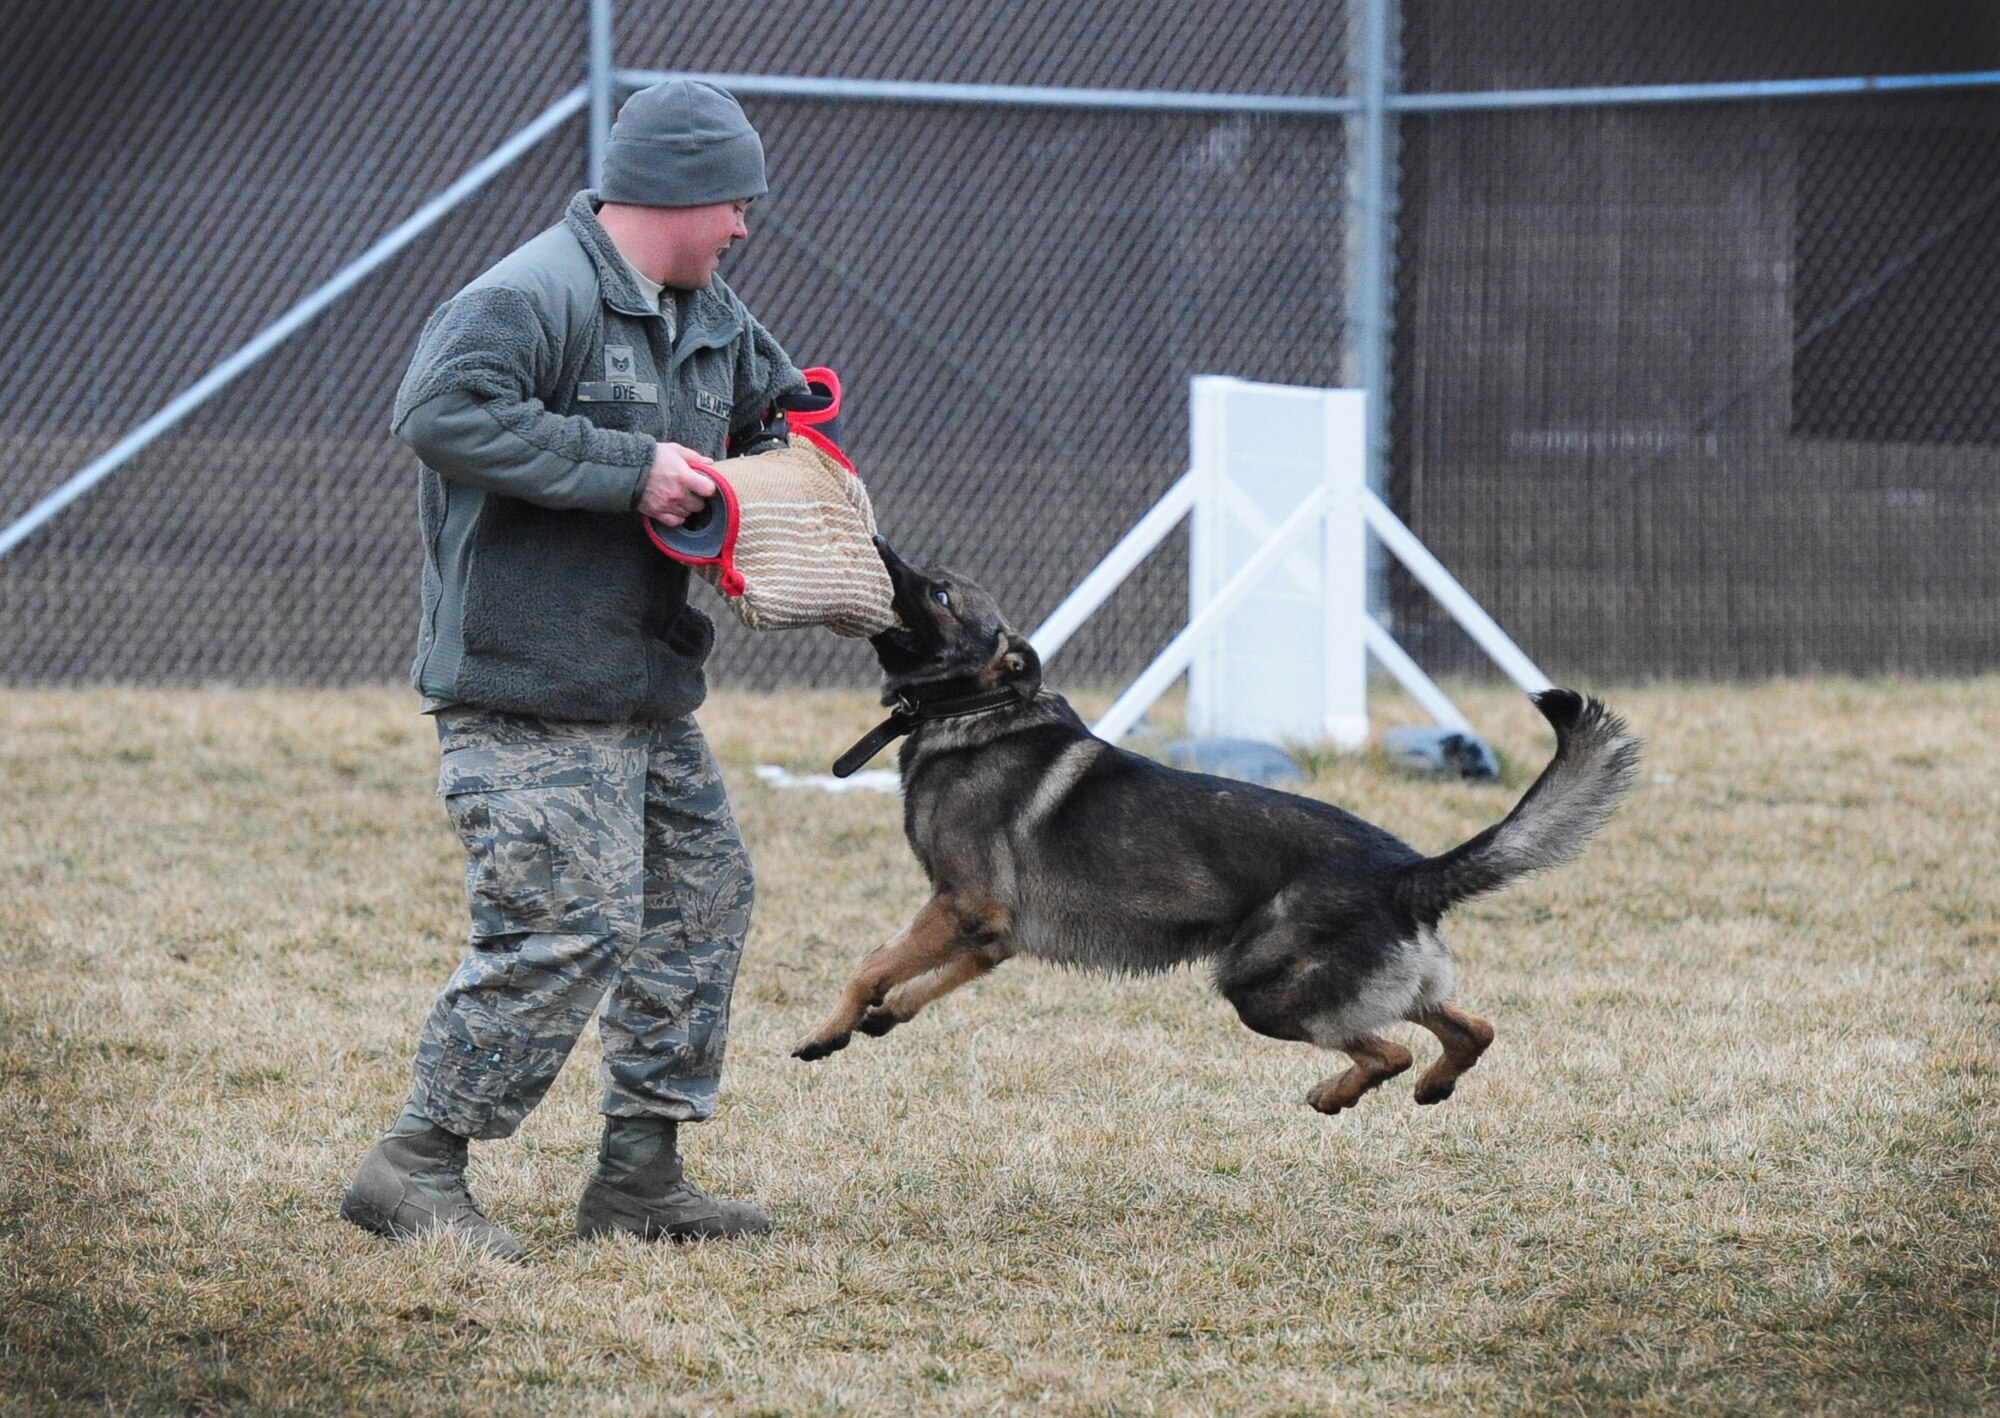 WHITEMAN AIR FORCE BASE, Mo. – Igore, 509th Security Forces Squadron military working dog, bites the sleeve of Staff Sgt. Adam Dye, 509th SFS MWD handler, during a bite sleeve scenario Feb. 15. Military working dogs are taught by their handlers to have controlled aggression through obedience courses and bite sleeve scenarios. (U.S. Air Force photo/Senior Airman Nick Wilson)